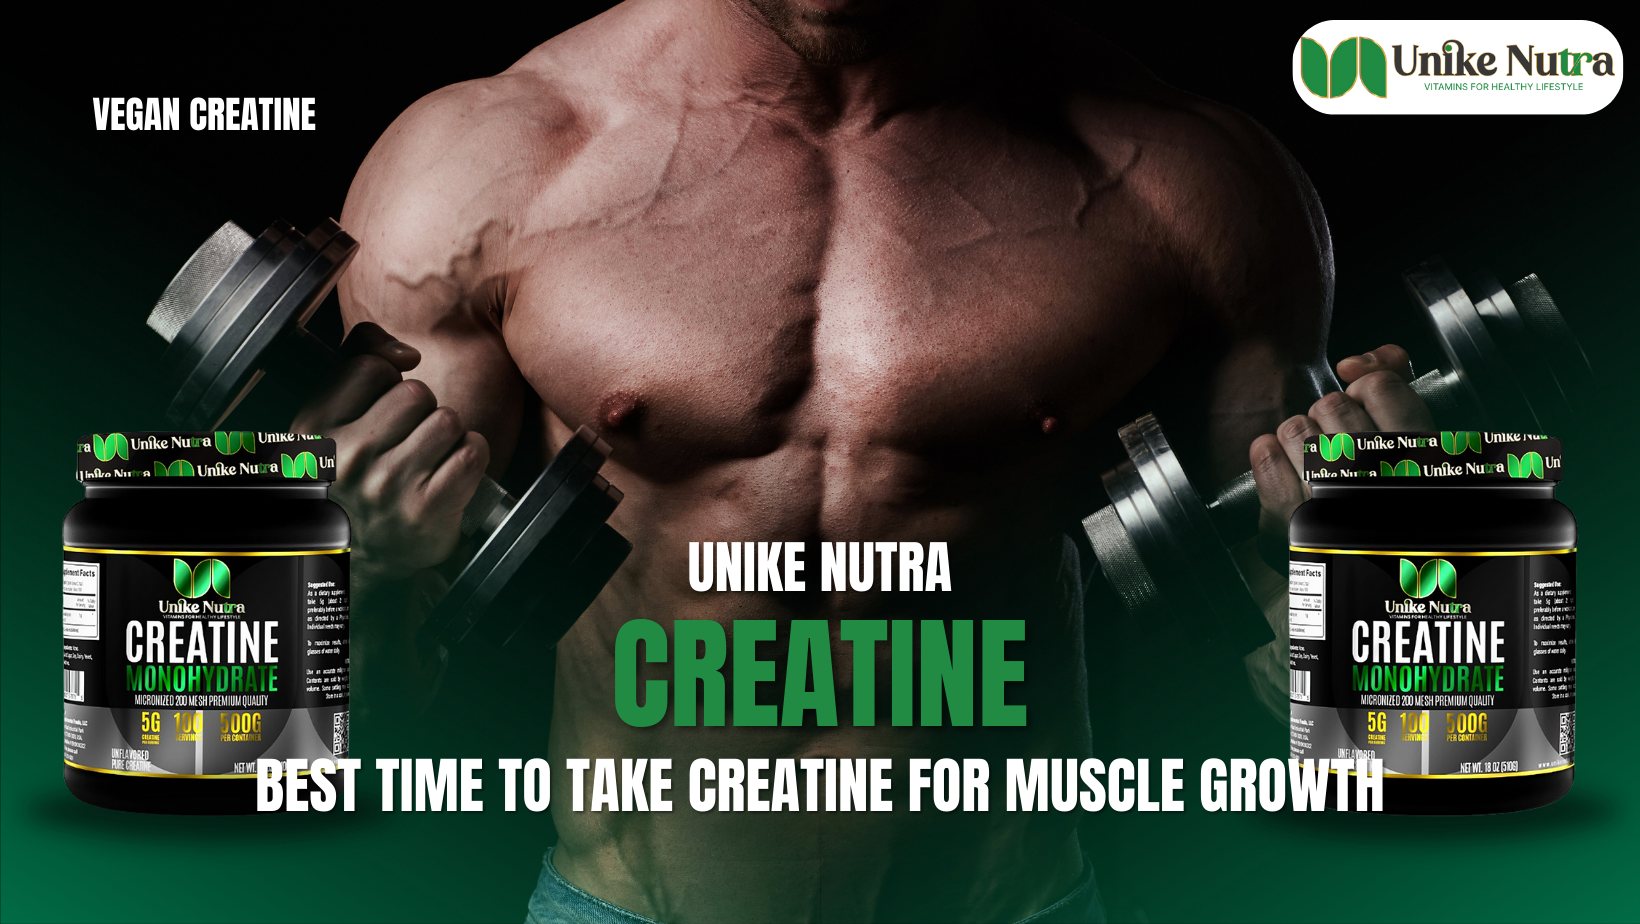 Best time to take creatine for muscle growth